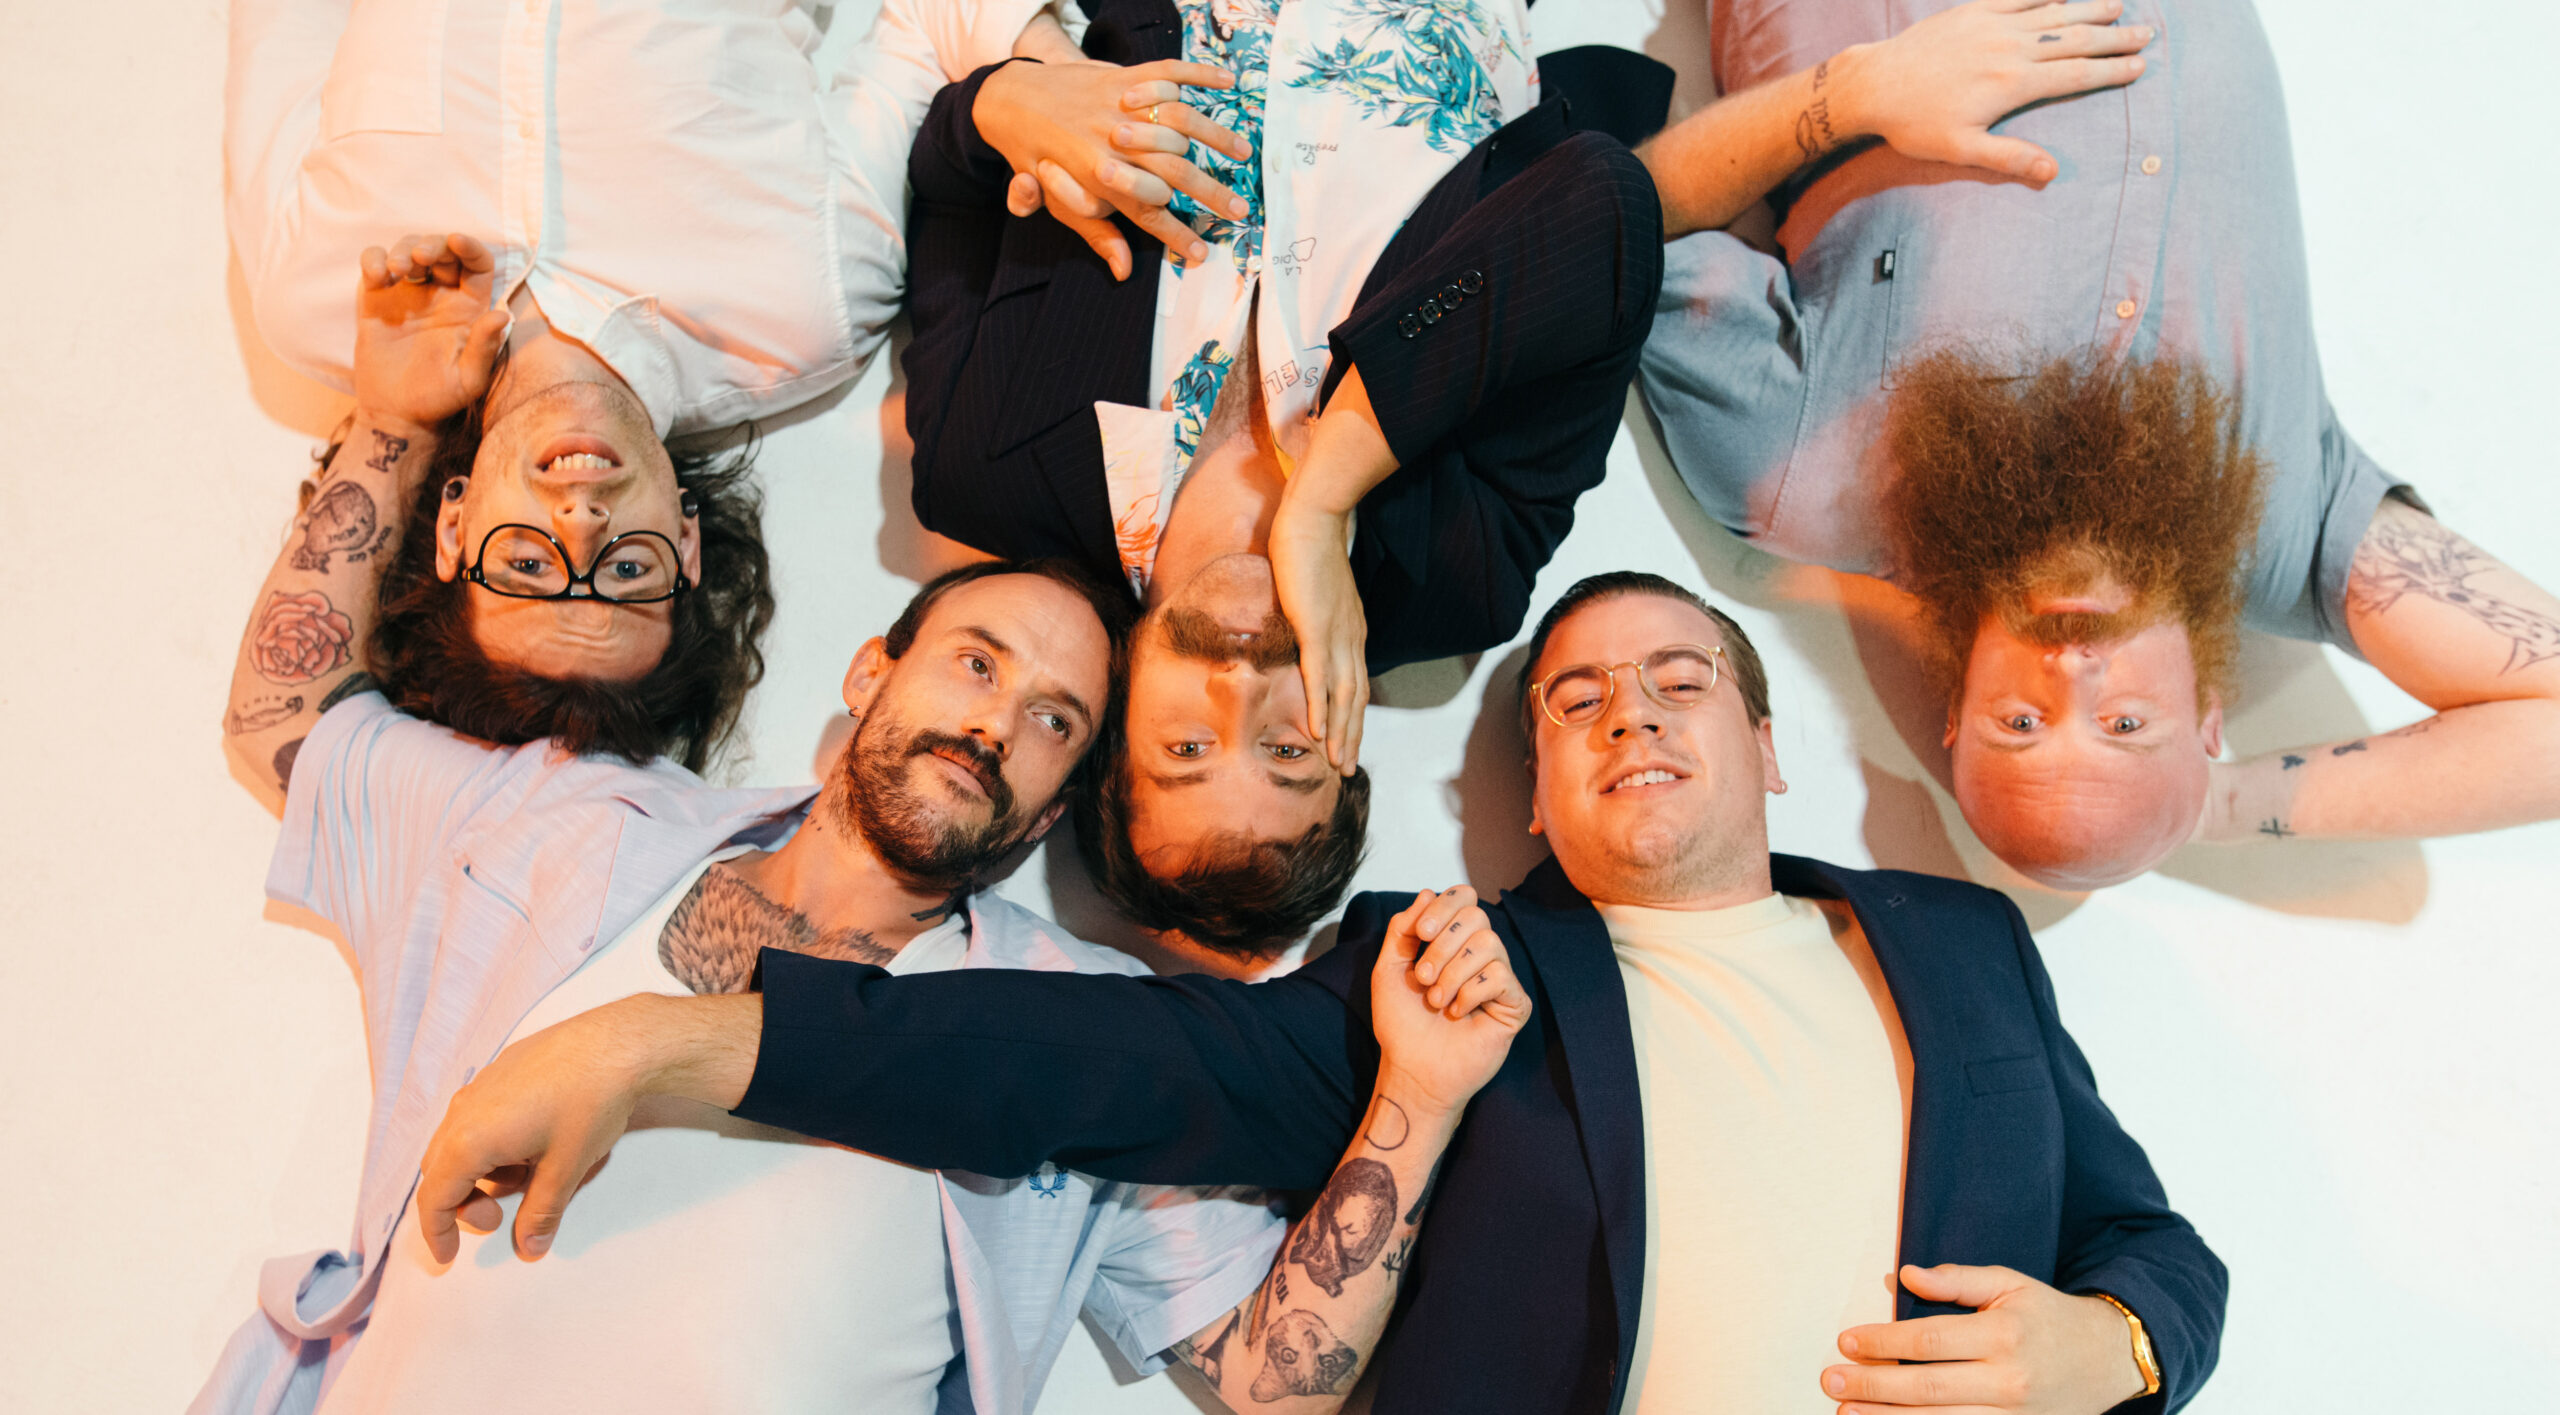 IDLES interview "We are allies whether people say we are or not" The